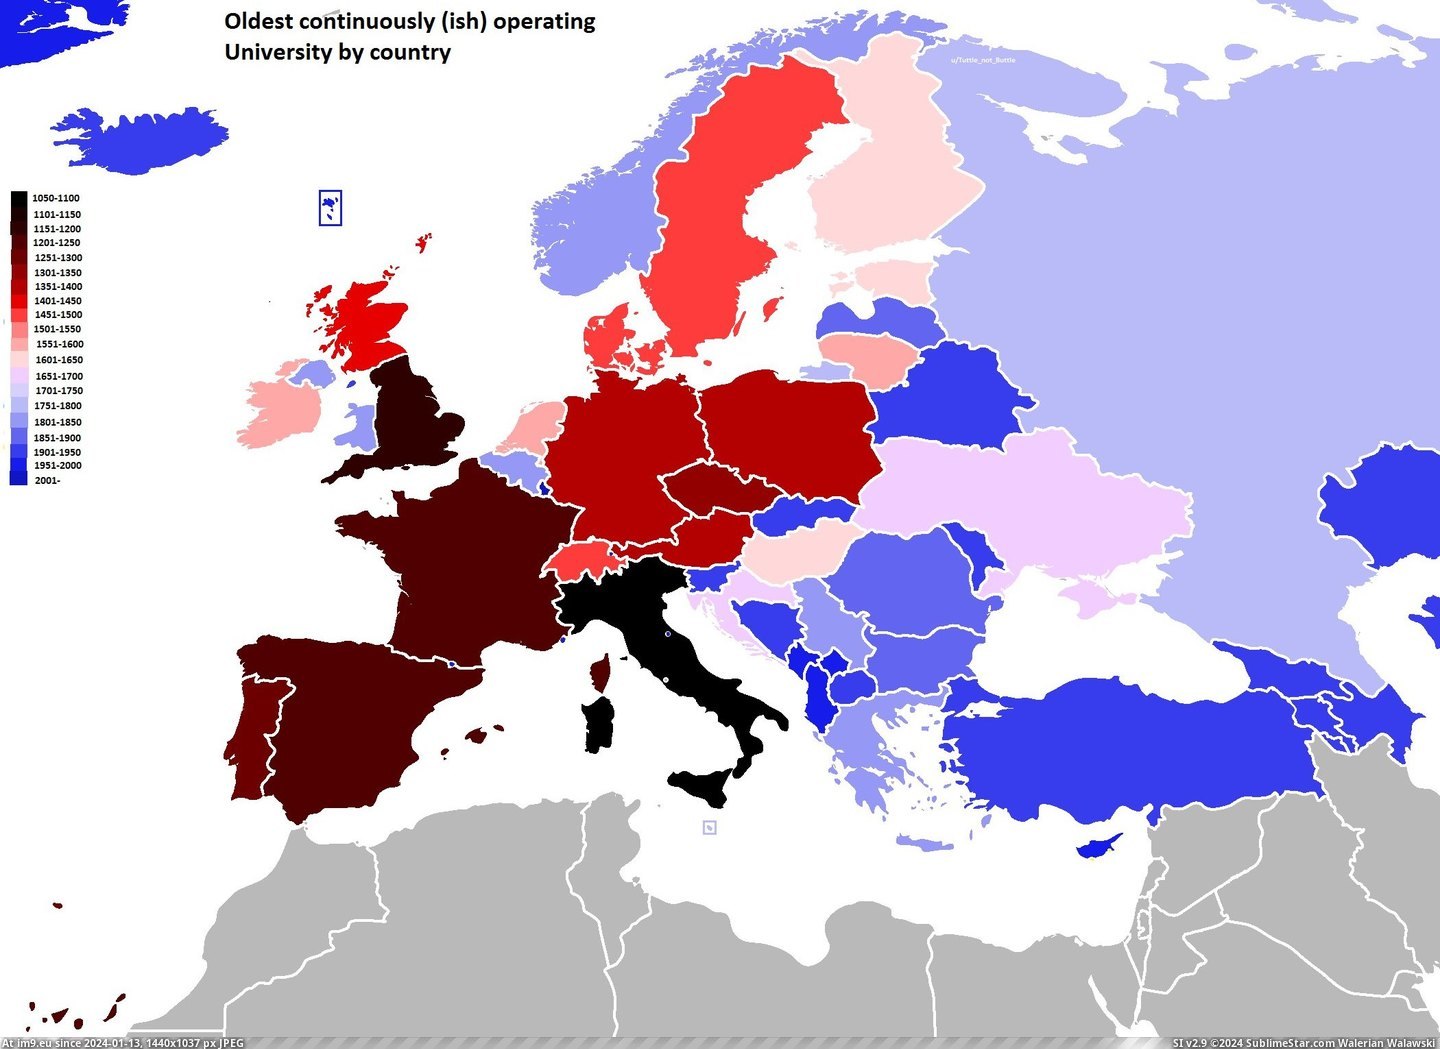 #European #Countries #University #Operating #Continuously #Oldest #2100x1525 #Establishment [Mapporn] Date of establishment of oldest continuously operating University in European countries (2100x1525) [OC] Pic. (Image of album My r/MAPS favs))